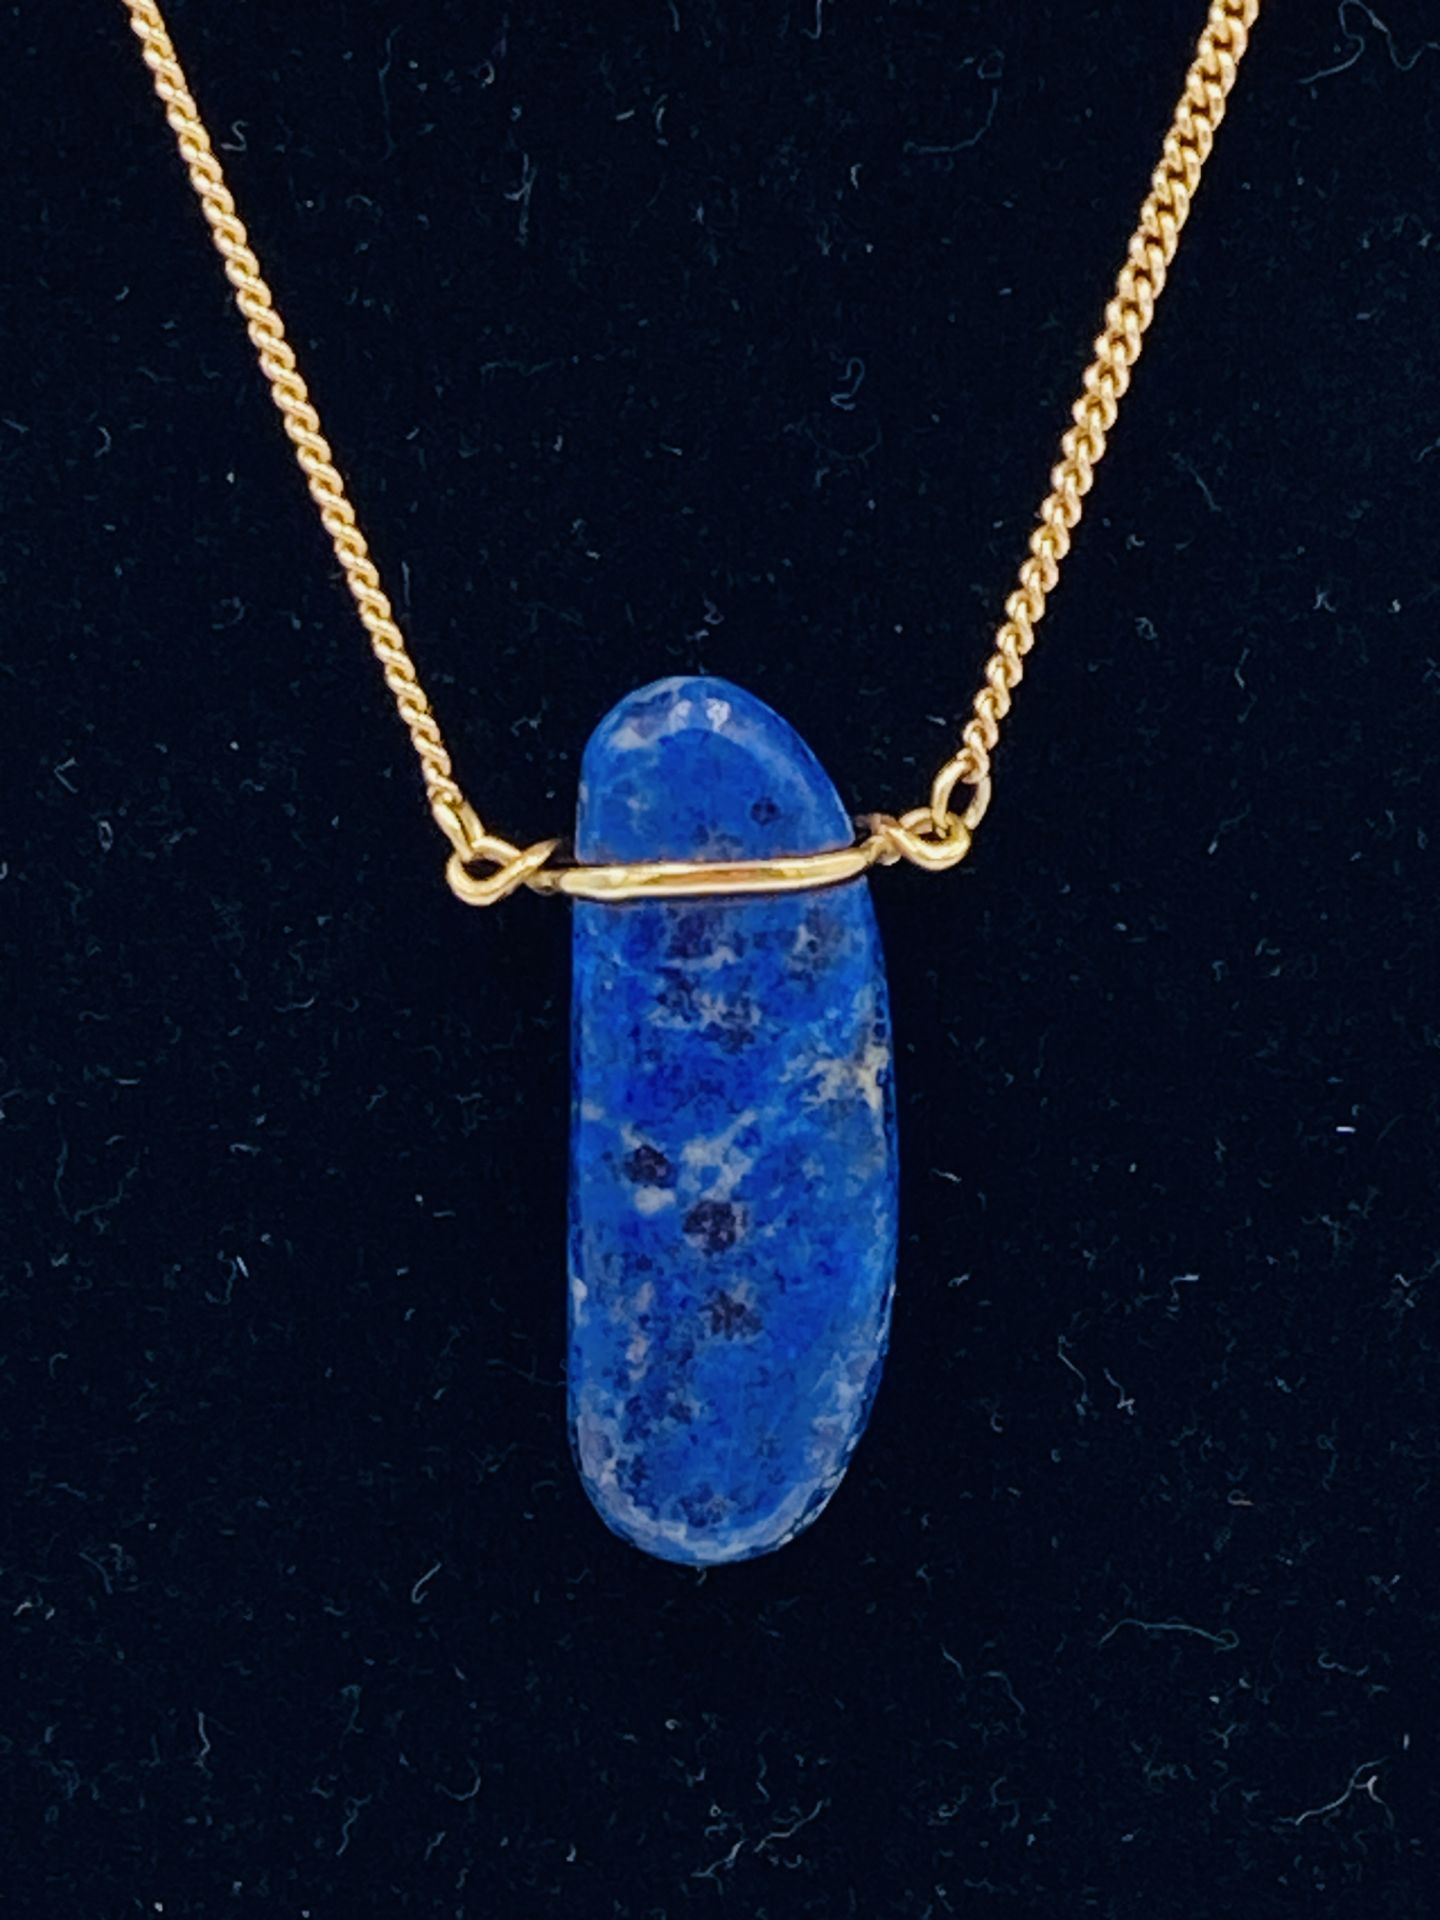 9ct gold necklace with a lapis pendant - Image 5 of 5